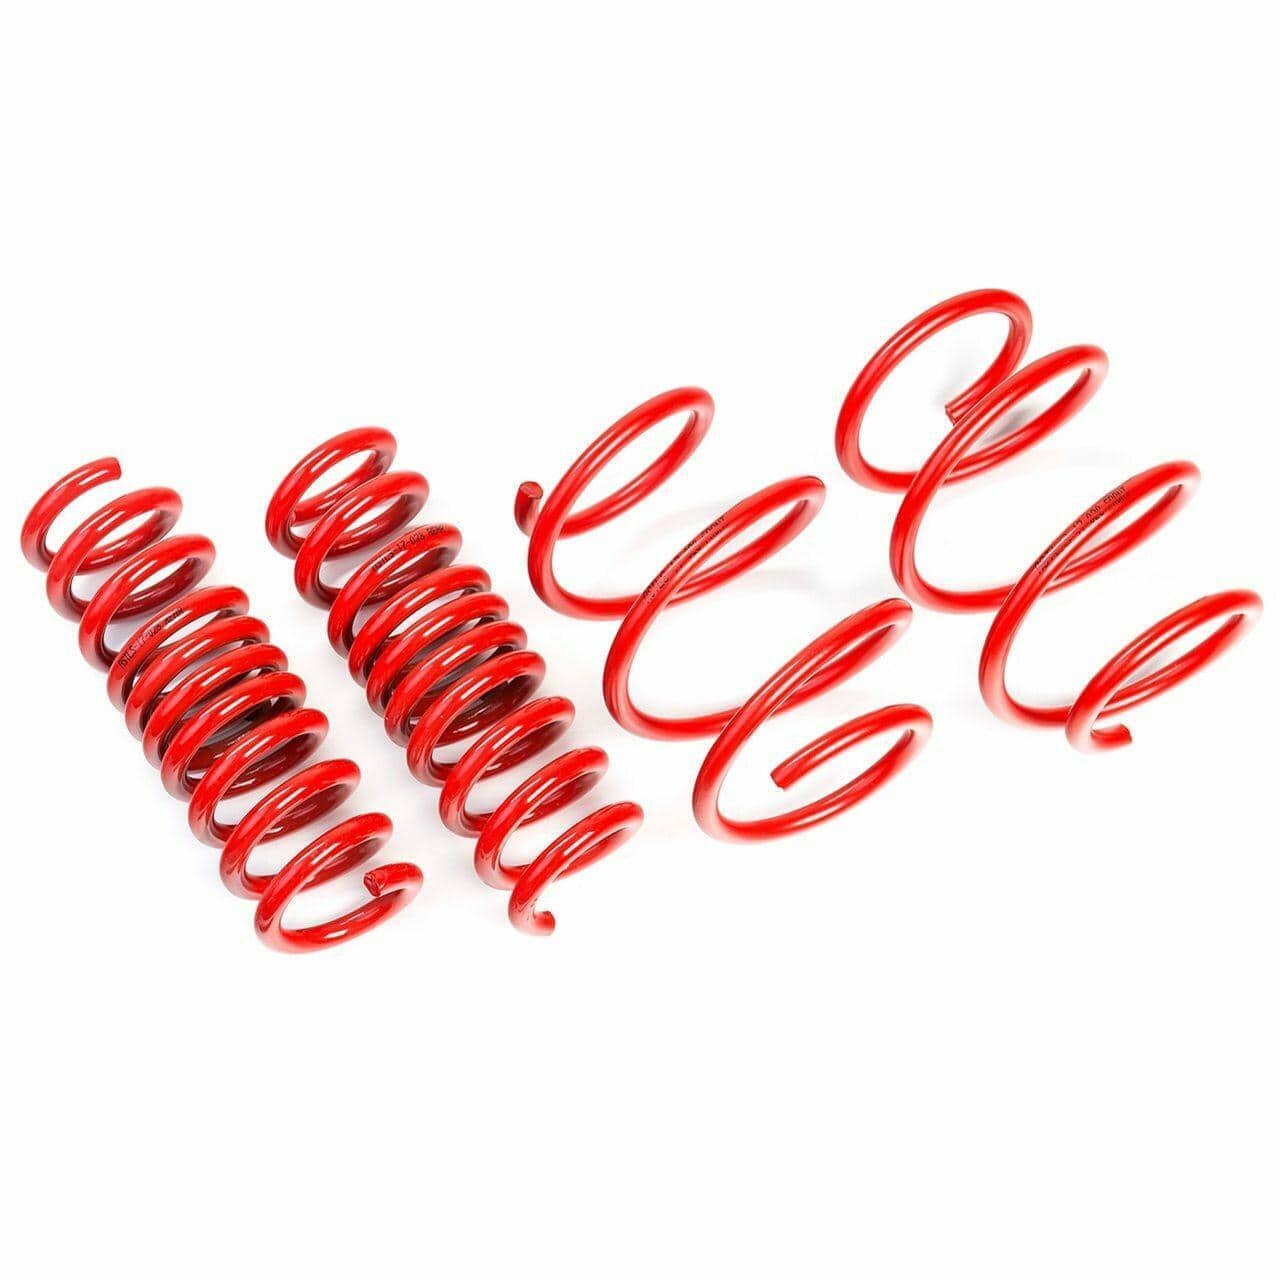 AST Suspension Lowering Springs (35MM/35MM TUV) - 1994-1998 BMW 3 Series 316i/318i Compact (E36) ASTLS-14-363